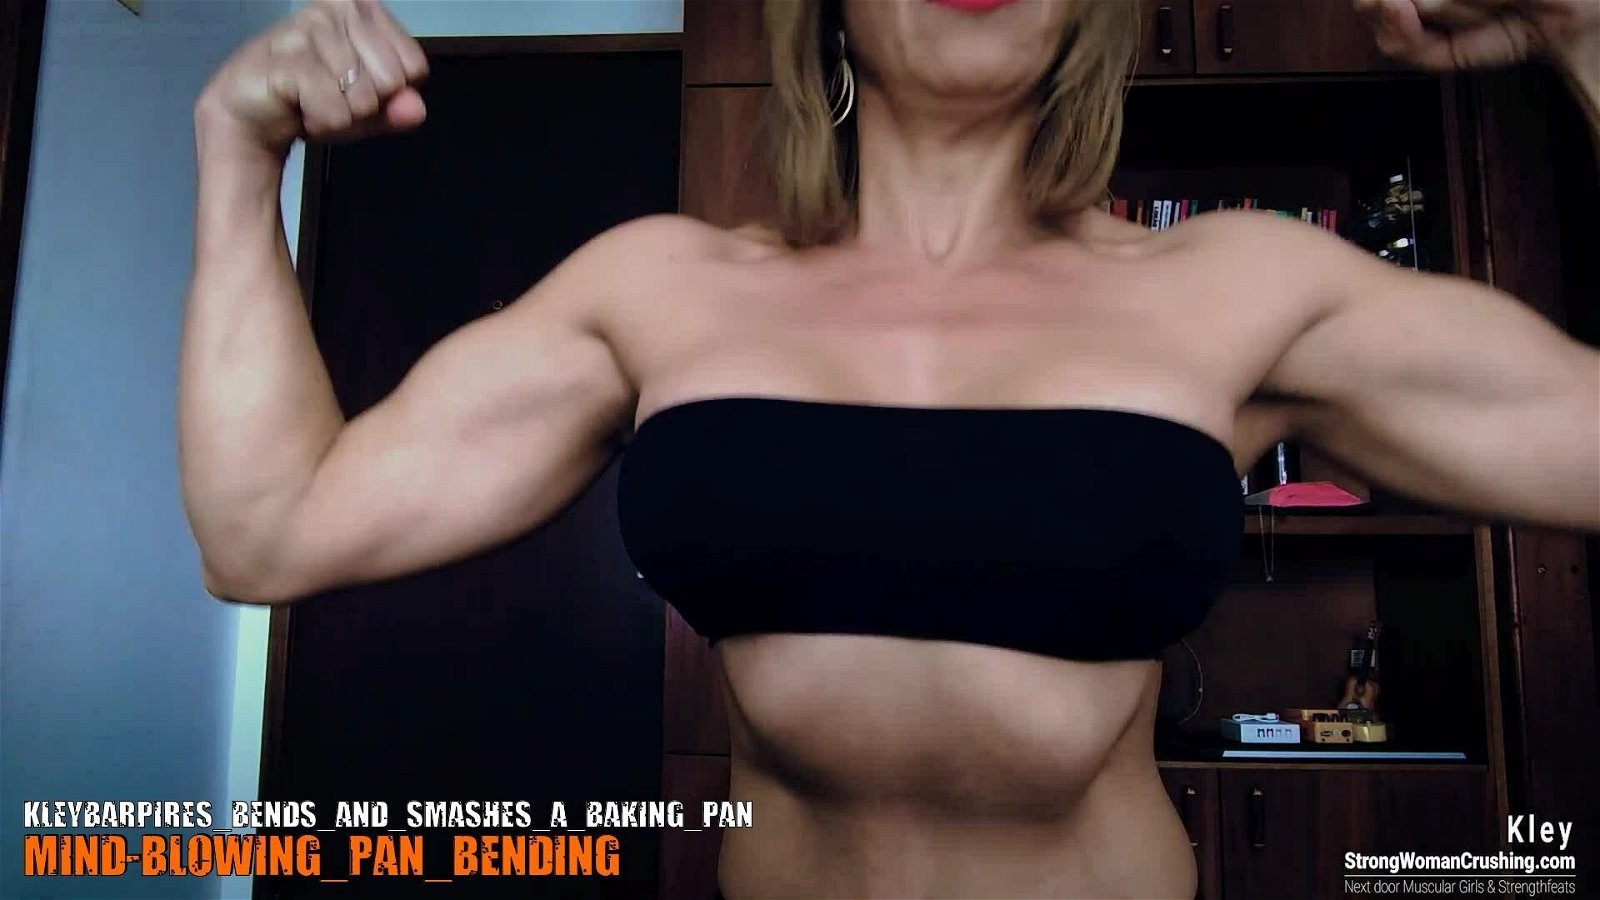 Photo by MusclegirlStrength with the username @MusclegirlStrength, who is a brand user,  October 21, 2023 at 6:01 PM and the text says '🎥 Watch Kleybarpires bend and smash a baking pan! 🍳

Don't miss out on this incredible video featuring our amazing model, Kley! 🔥

Join our membership now to watch the full video and witness the strength of a strong woman crushing objects like..'